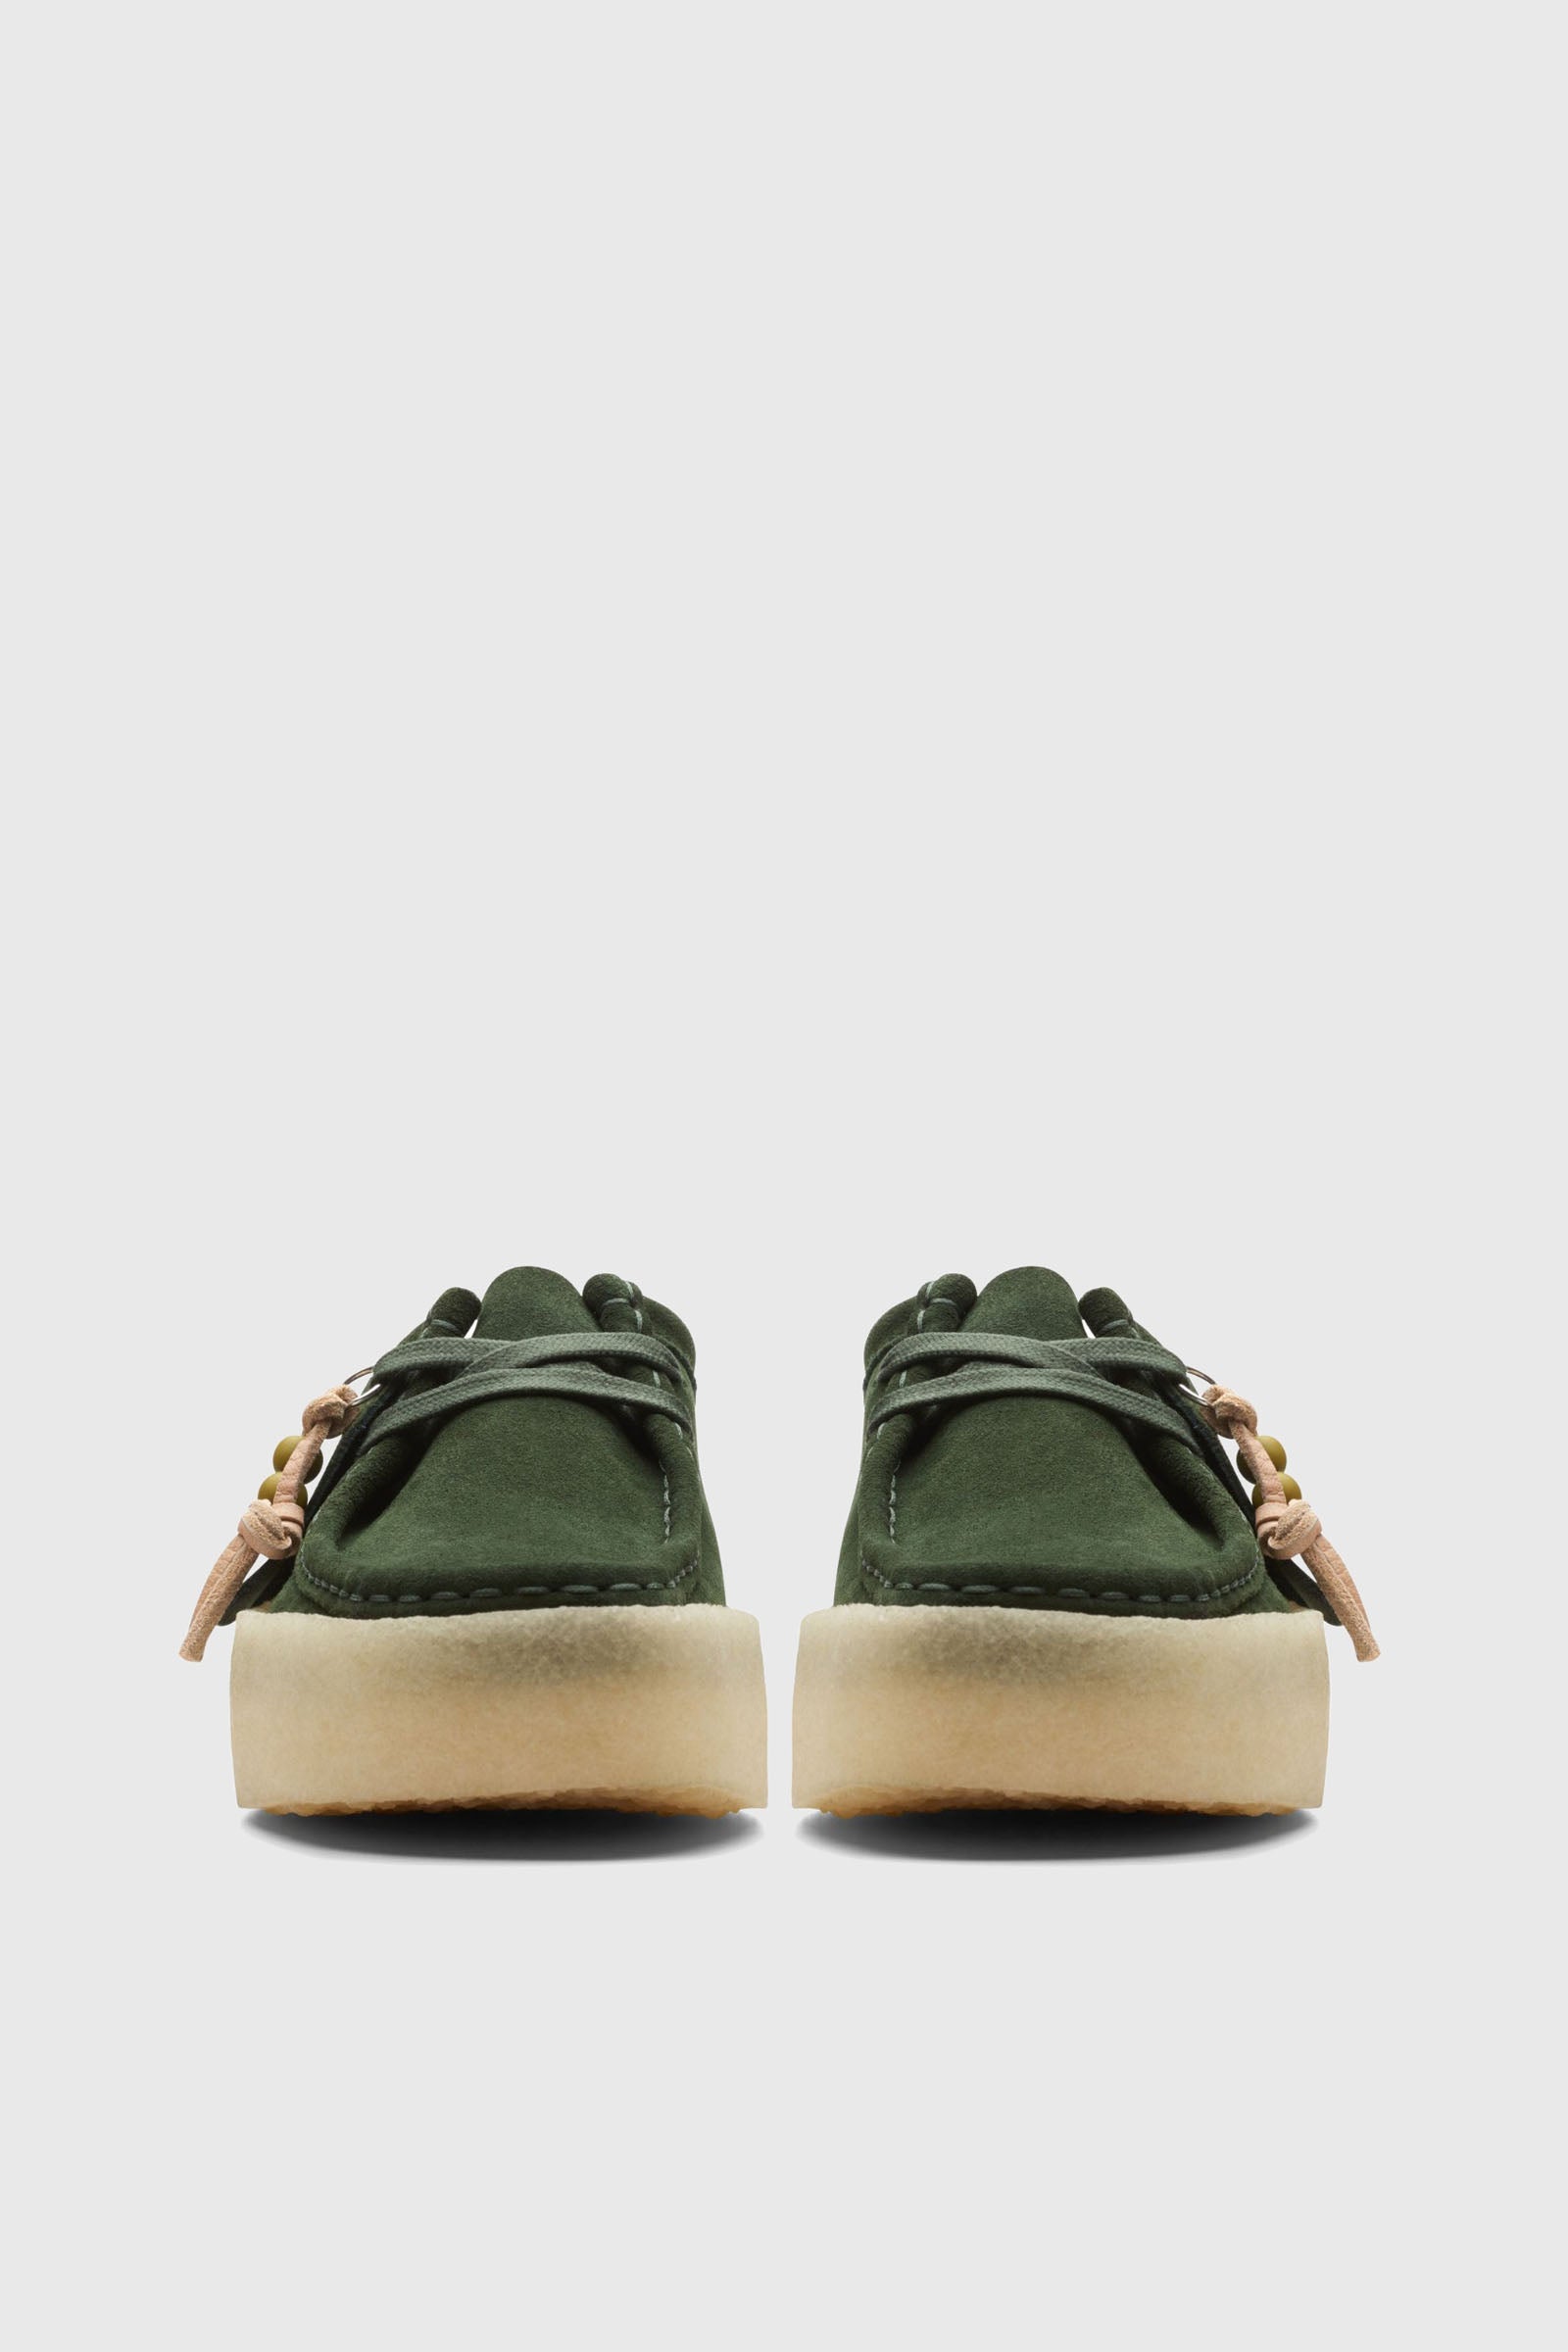 Clarks Wallabee Cup Leather Shoes in Dark Green/Dark Green - 4